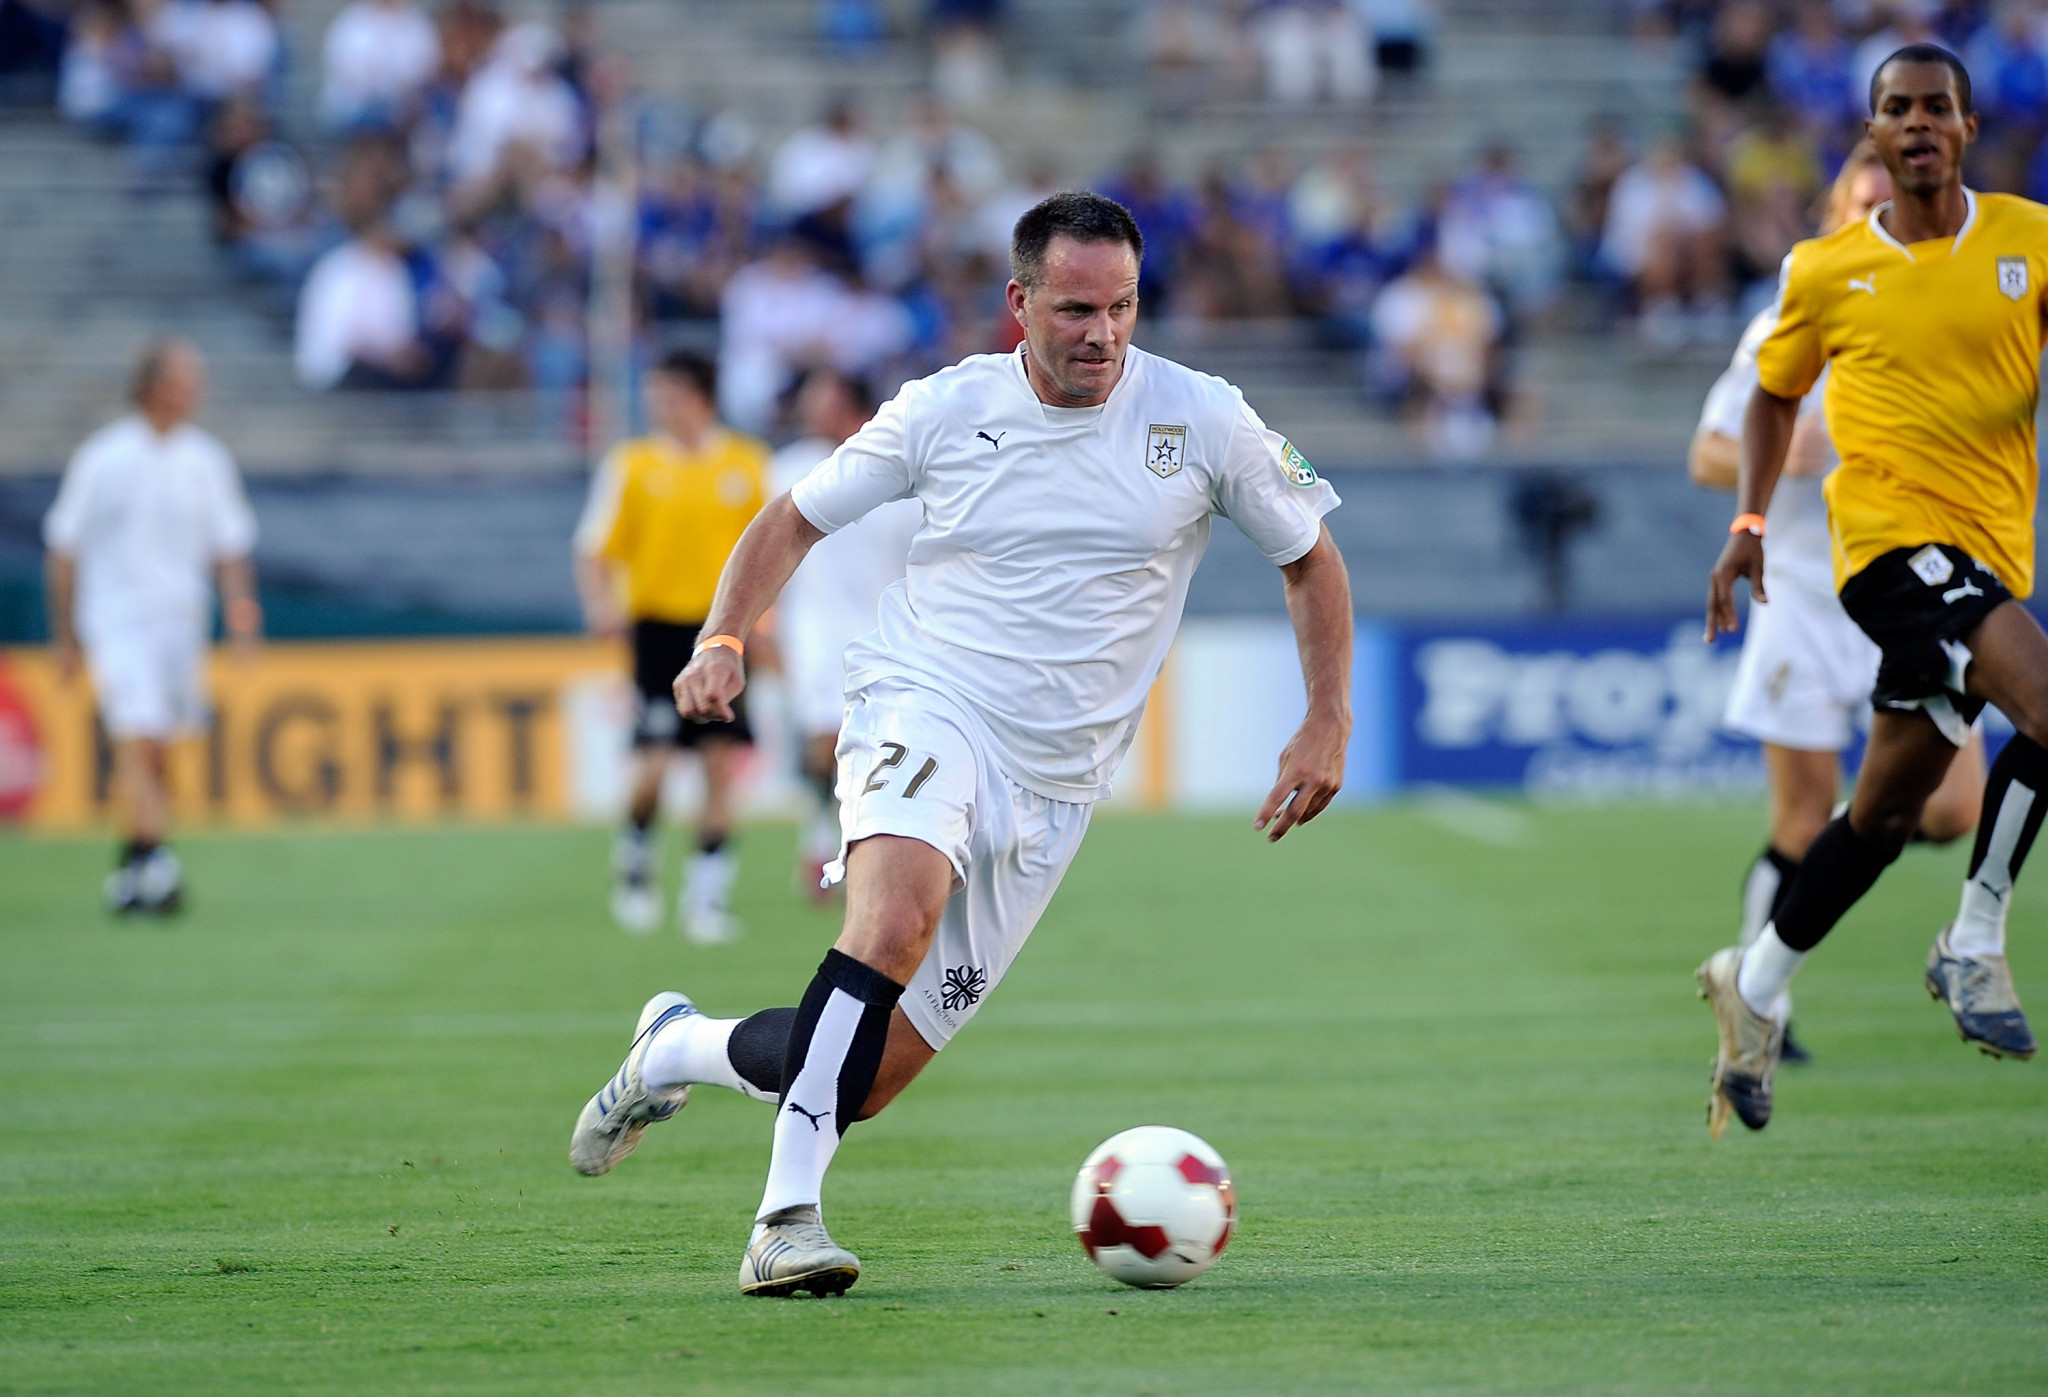 Former men's national team player Eric Wynalda is one of candidates vying to become the next President of the United States Soccer Federation ©Getty Images